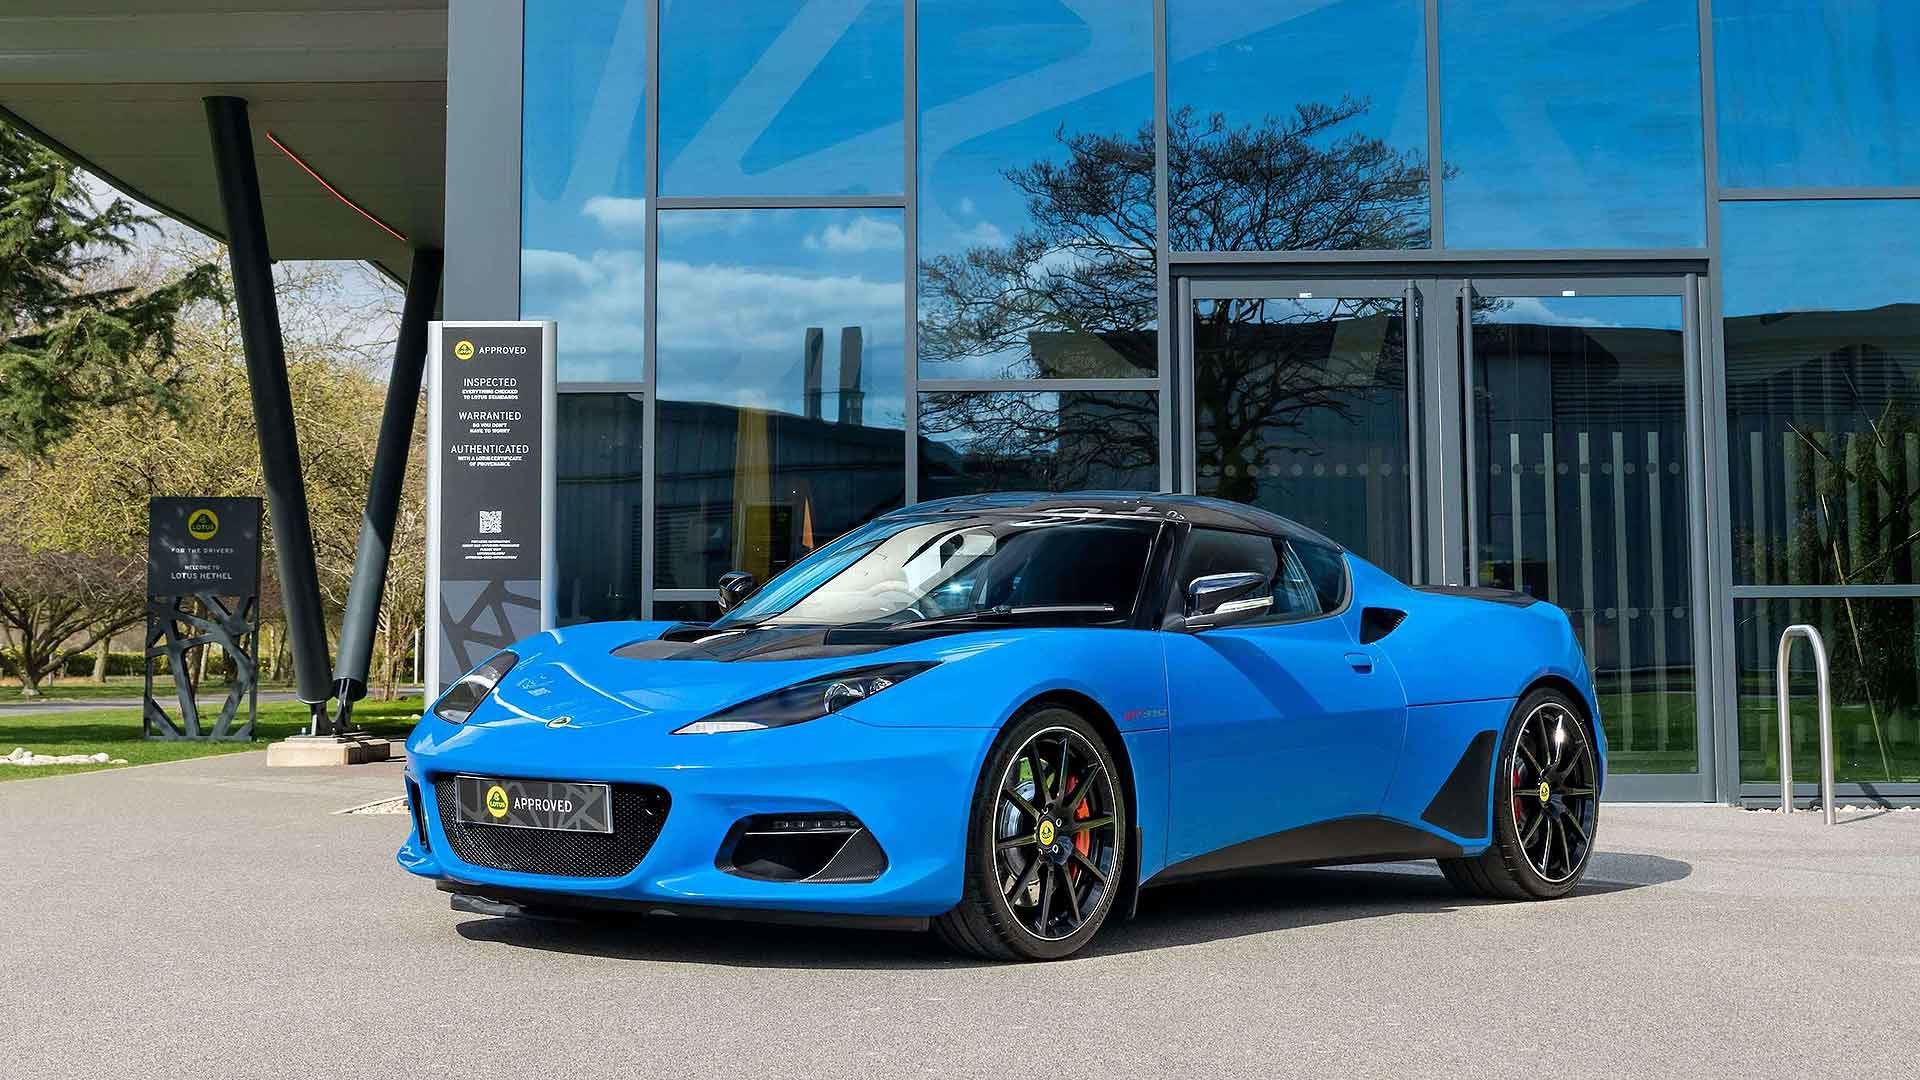 Lotus Approved used car scheme